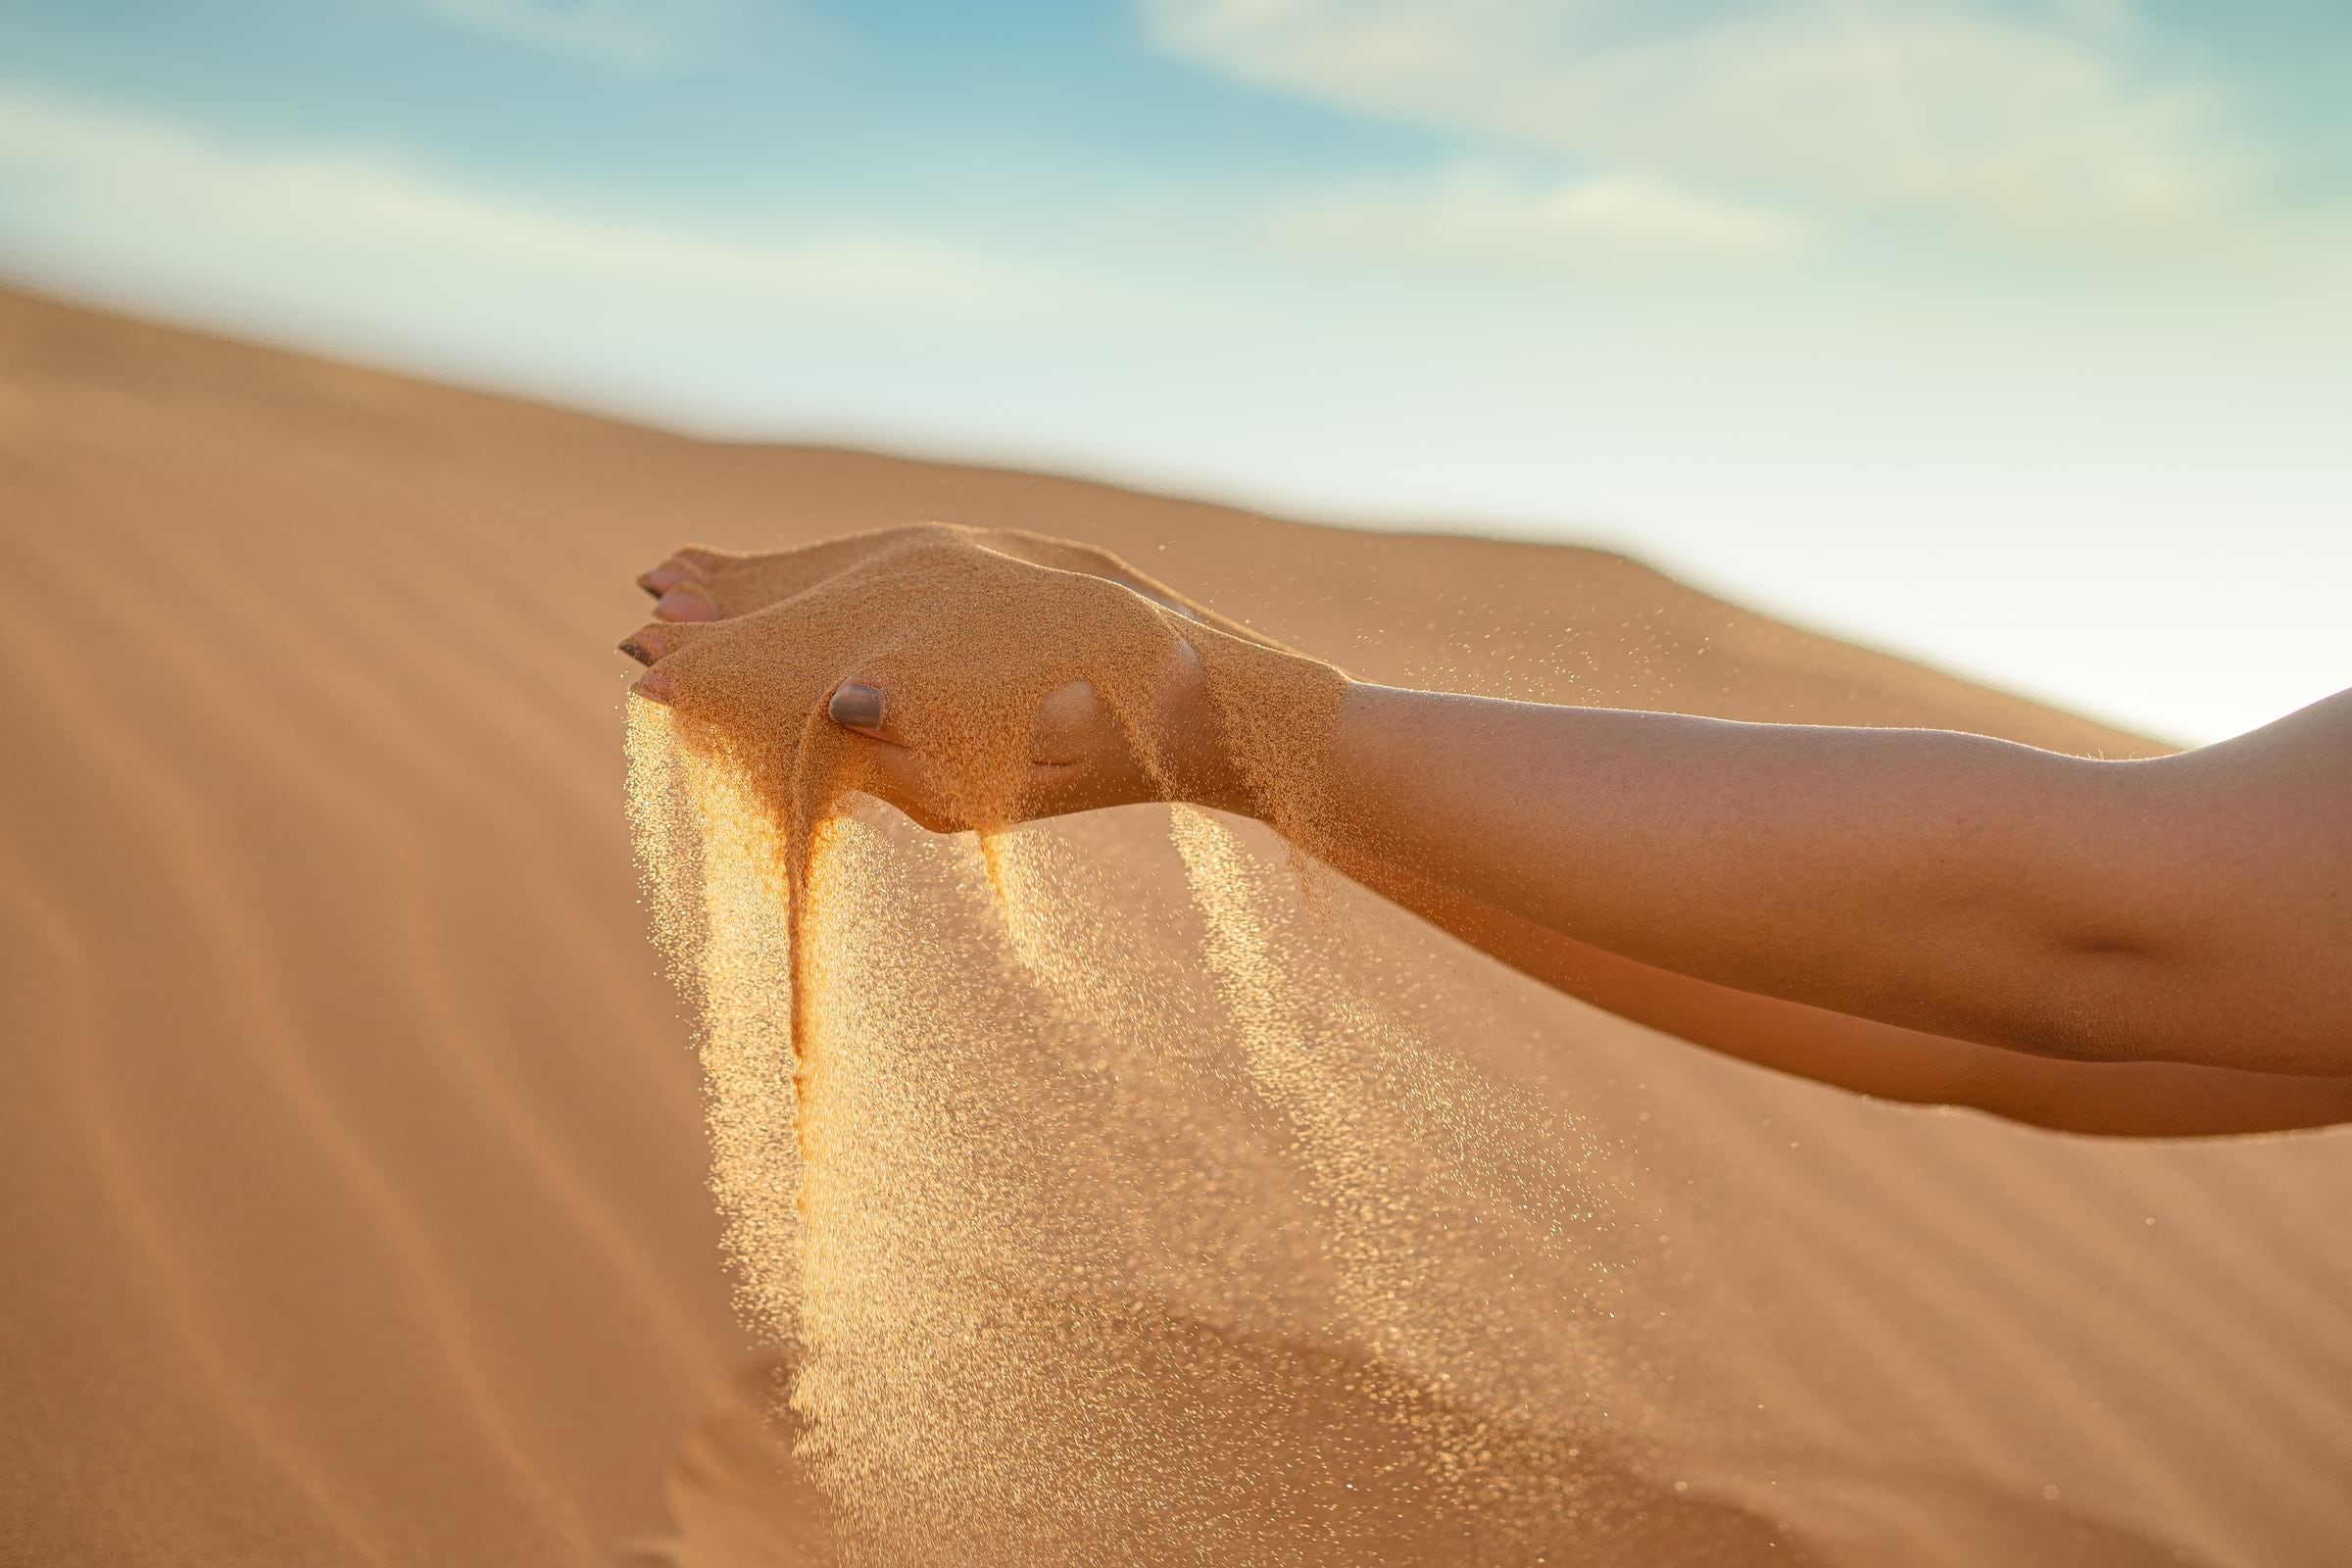 A hand at the end of an extended arm holds a pile of fine sand which is falling from the hand. A sand dune is in the background